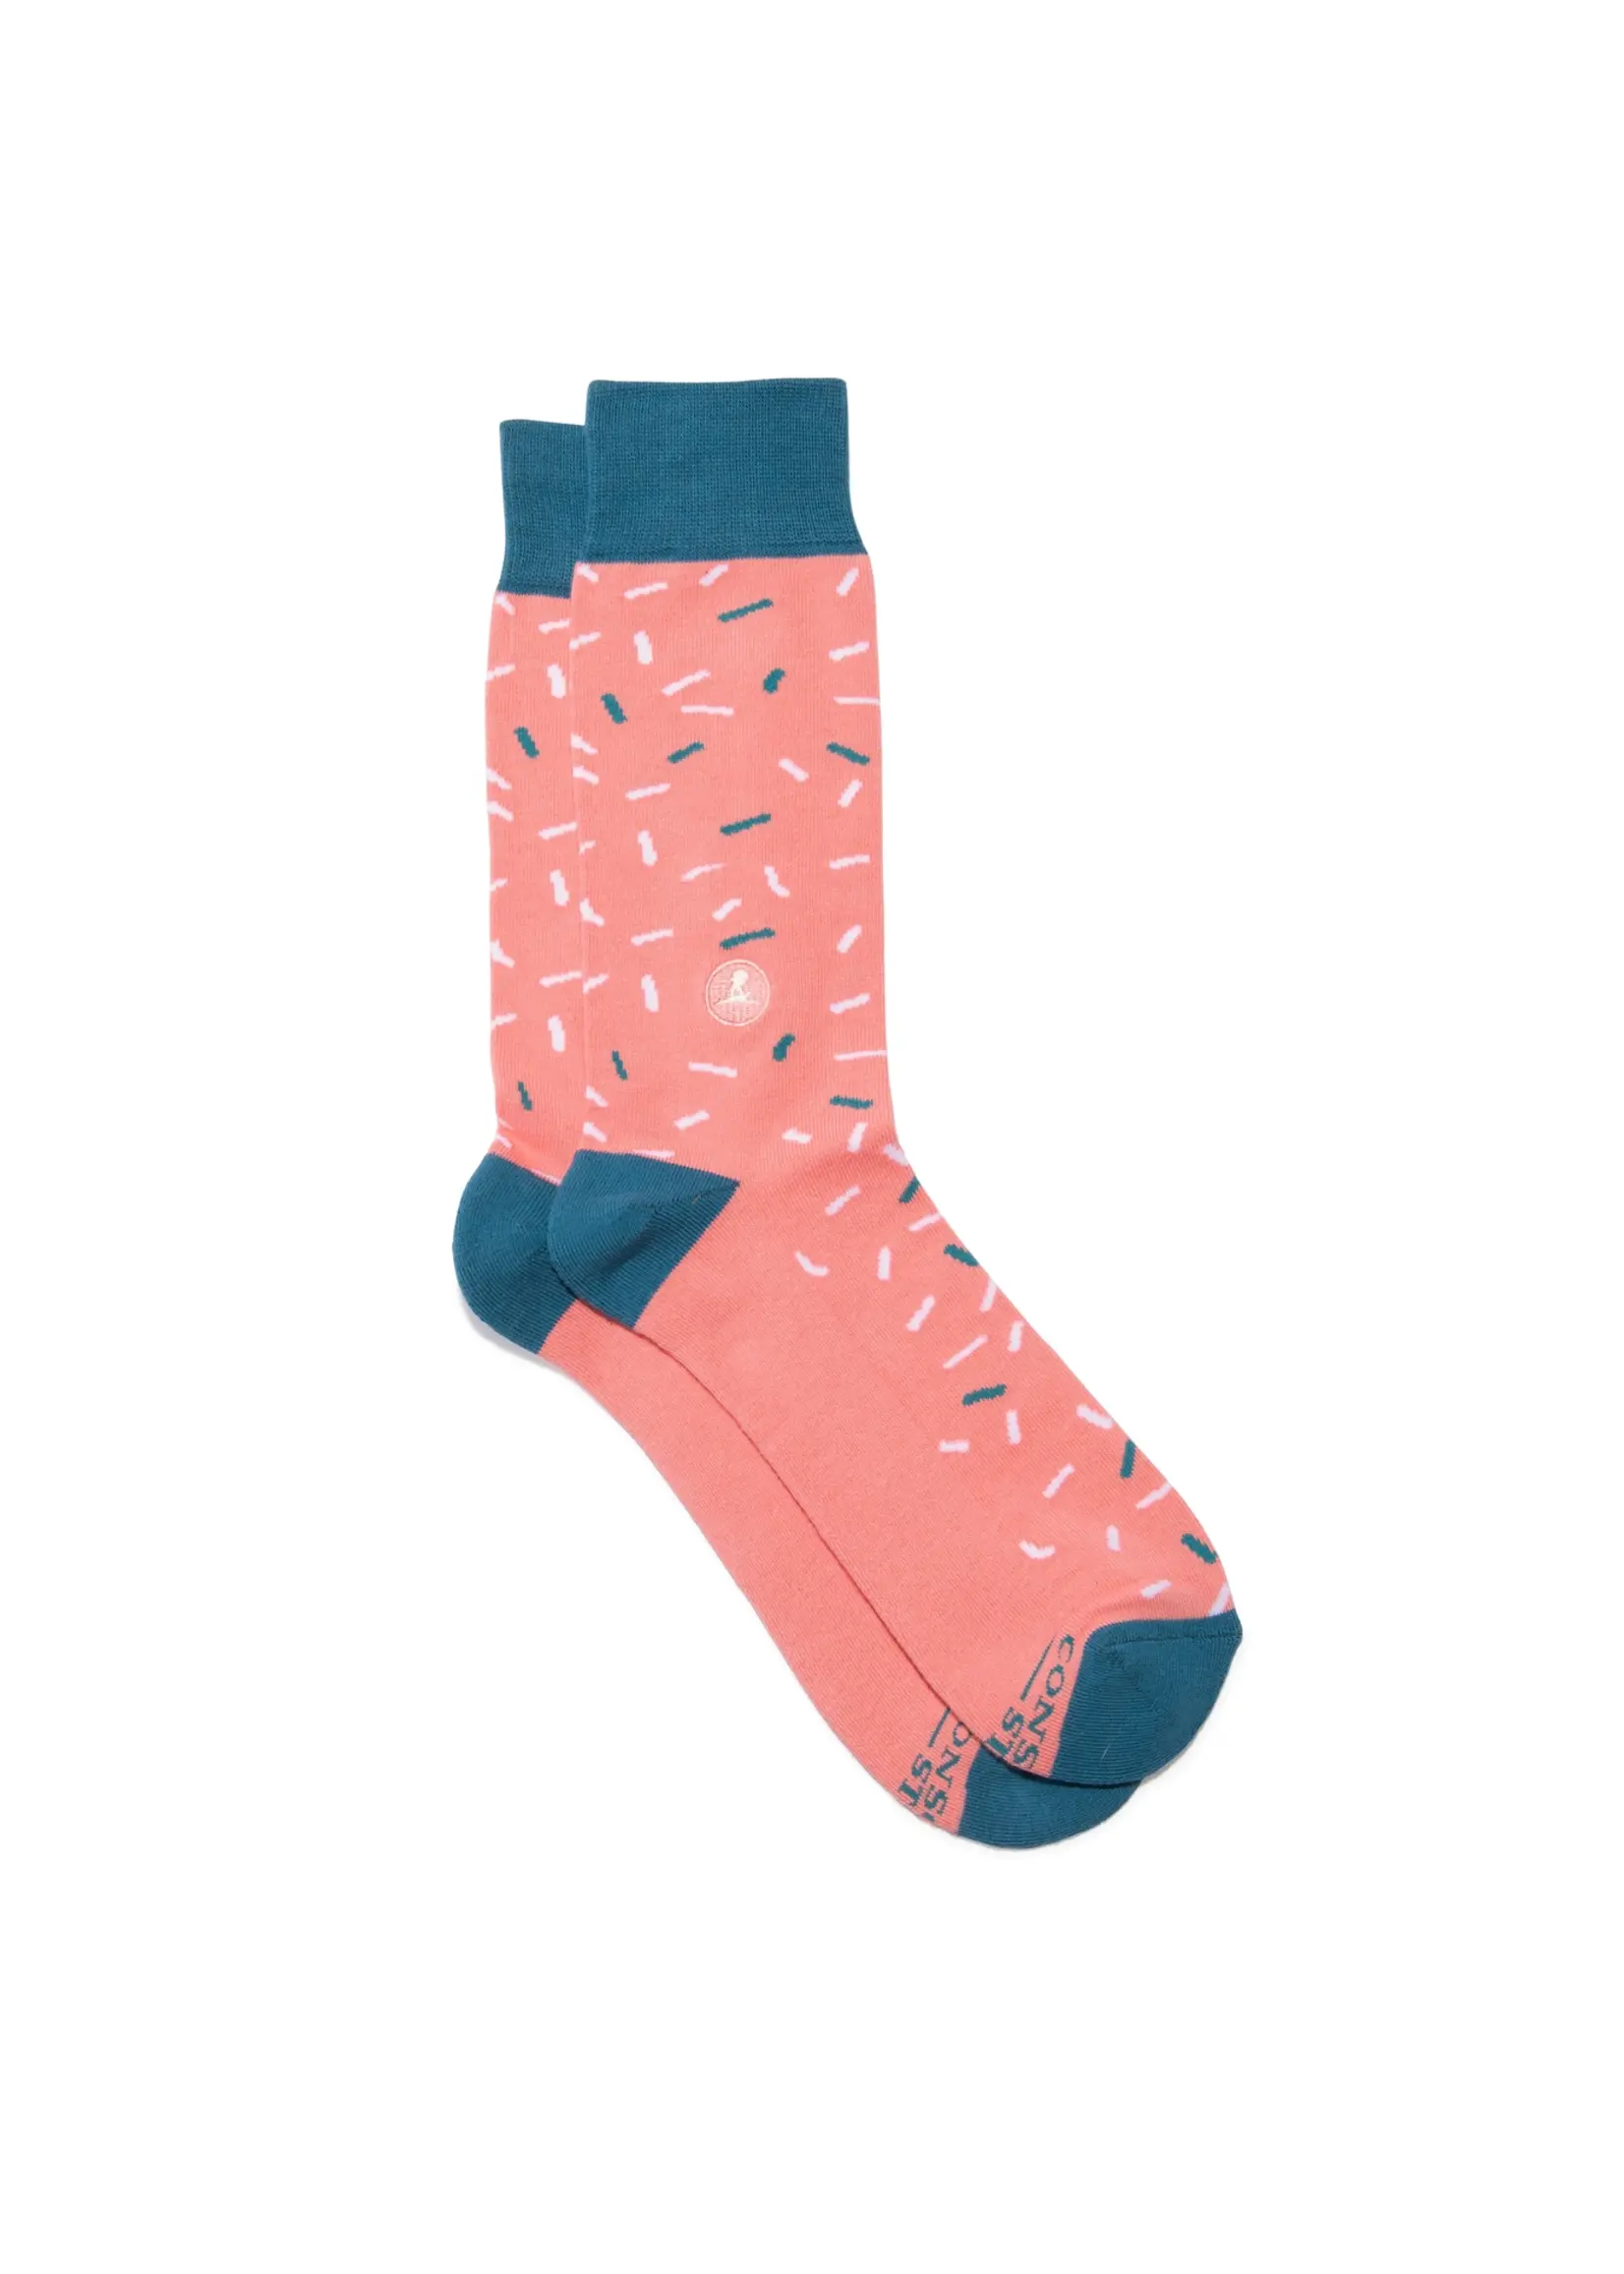 Conscious Step Socks That Find a Cure